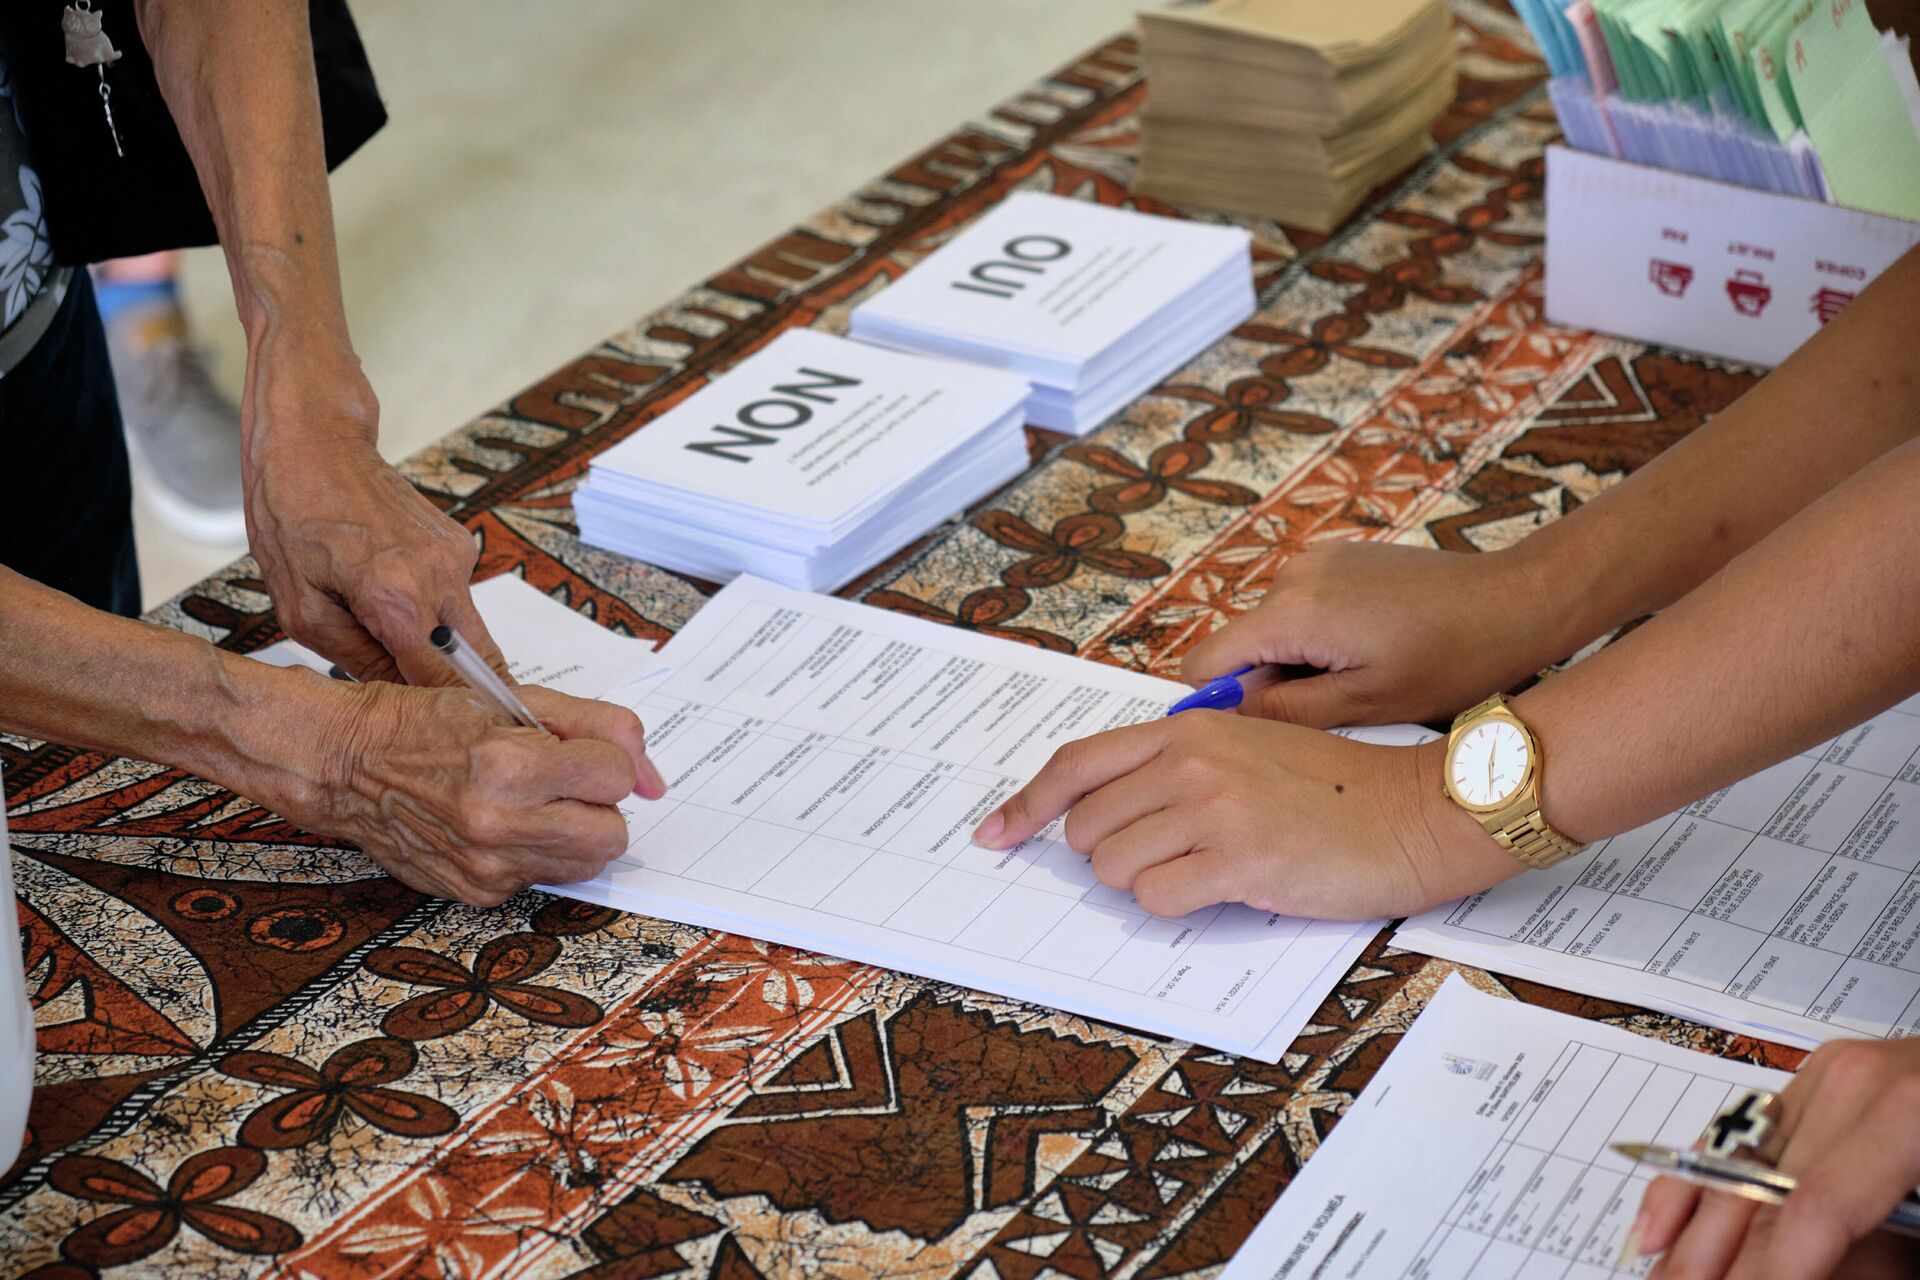 A man prepares to cast his ballot for the referendum on independence at a polling station of the City Hall in Noumea, on the French South Pacific territory of New Caledonia on December 12, 2021 - Sputnik International, 1920, 12.12.2021